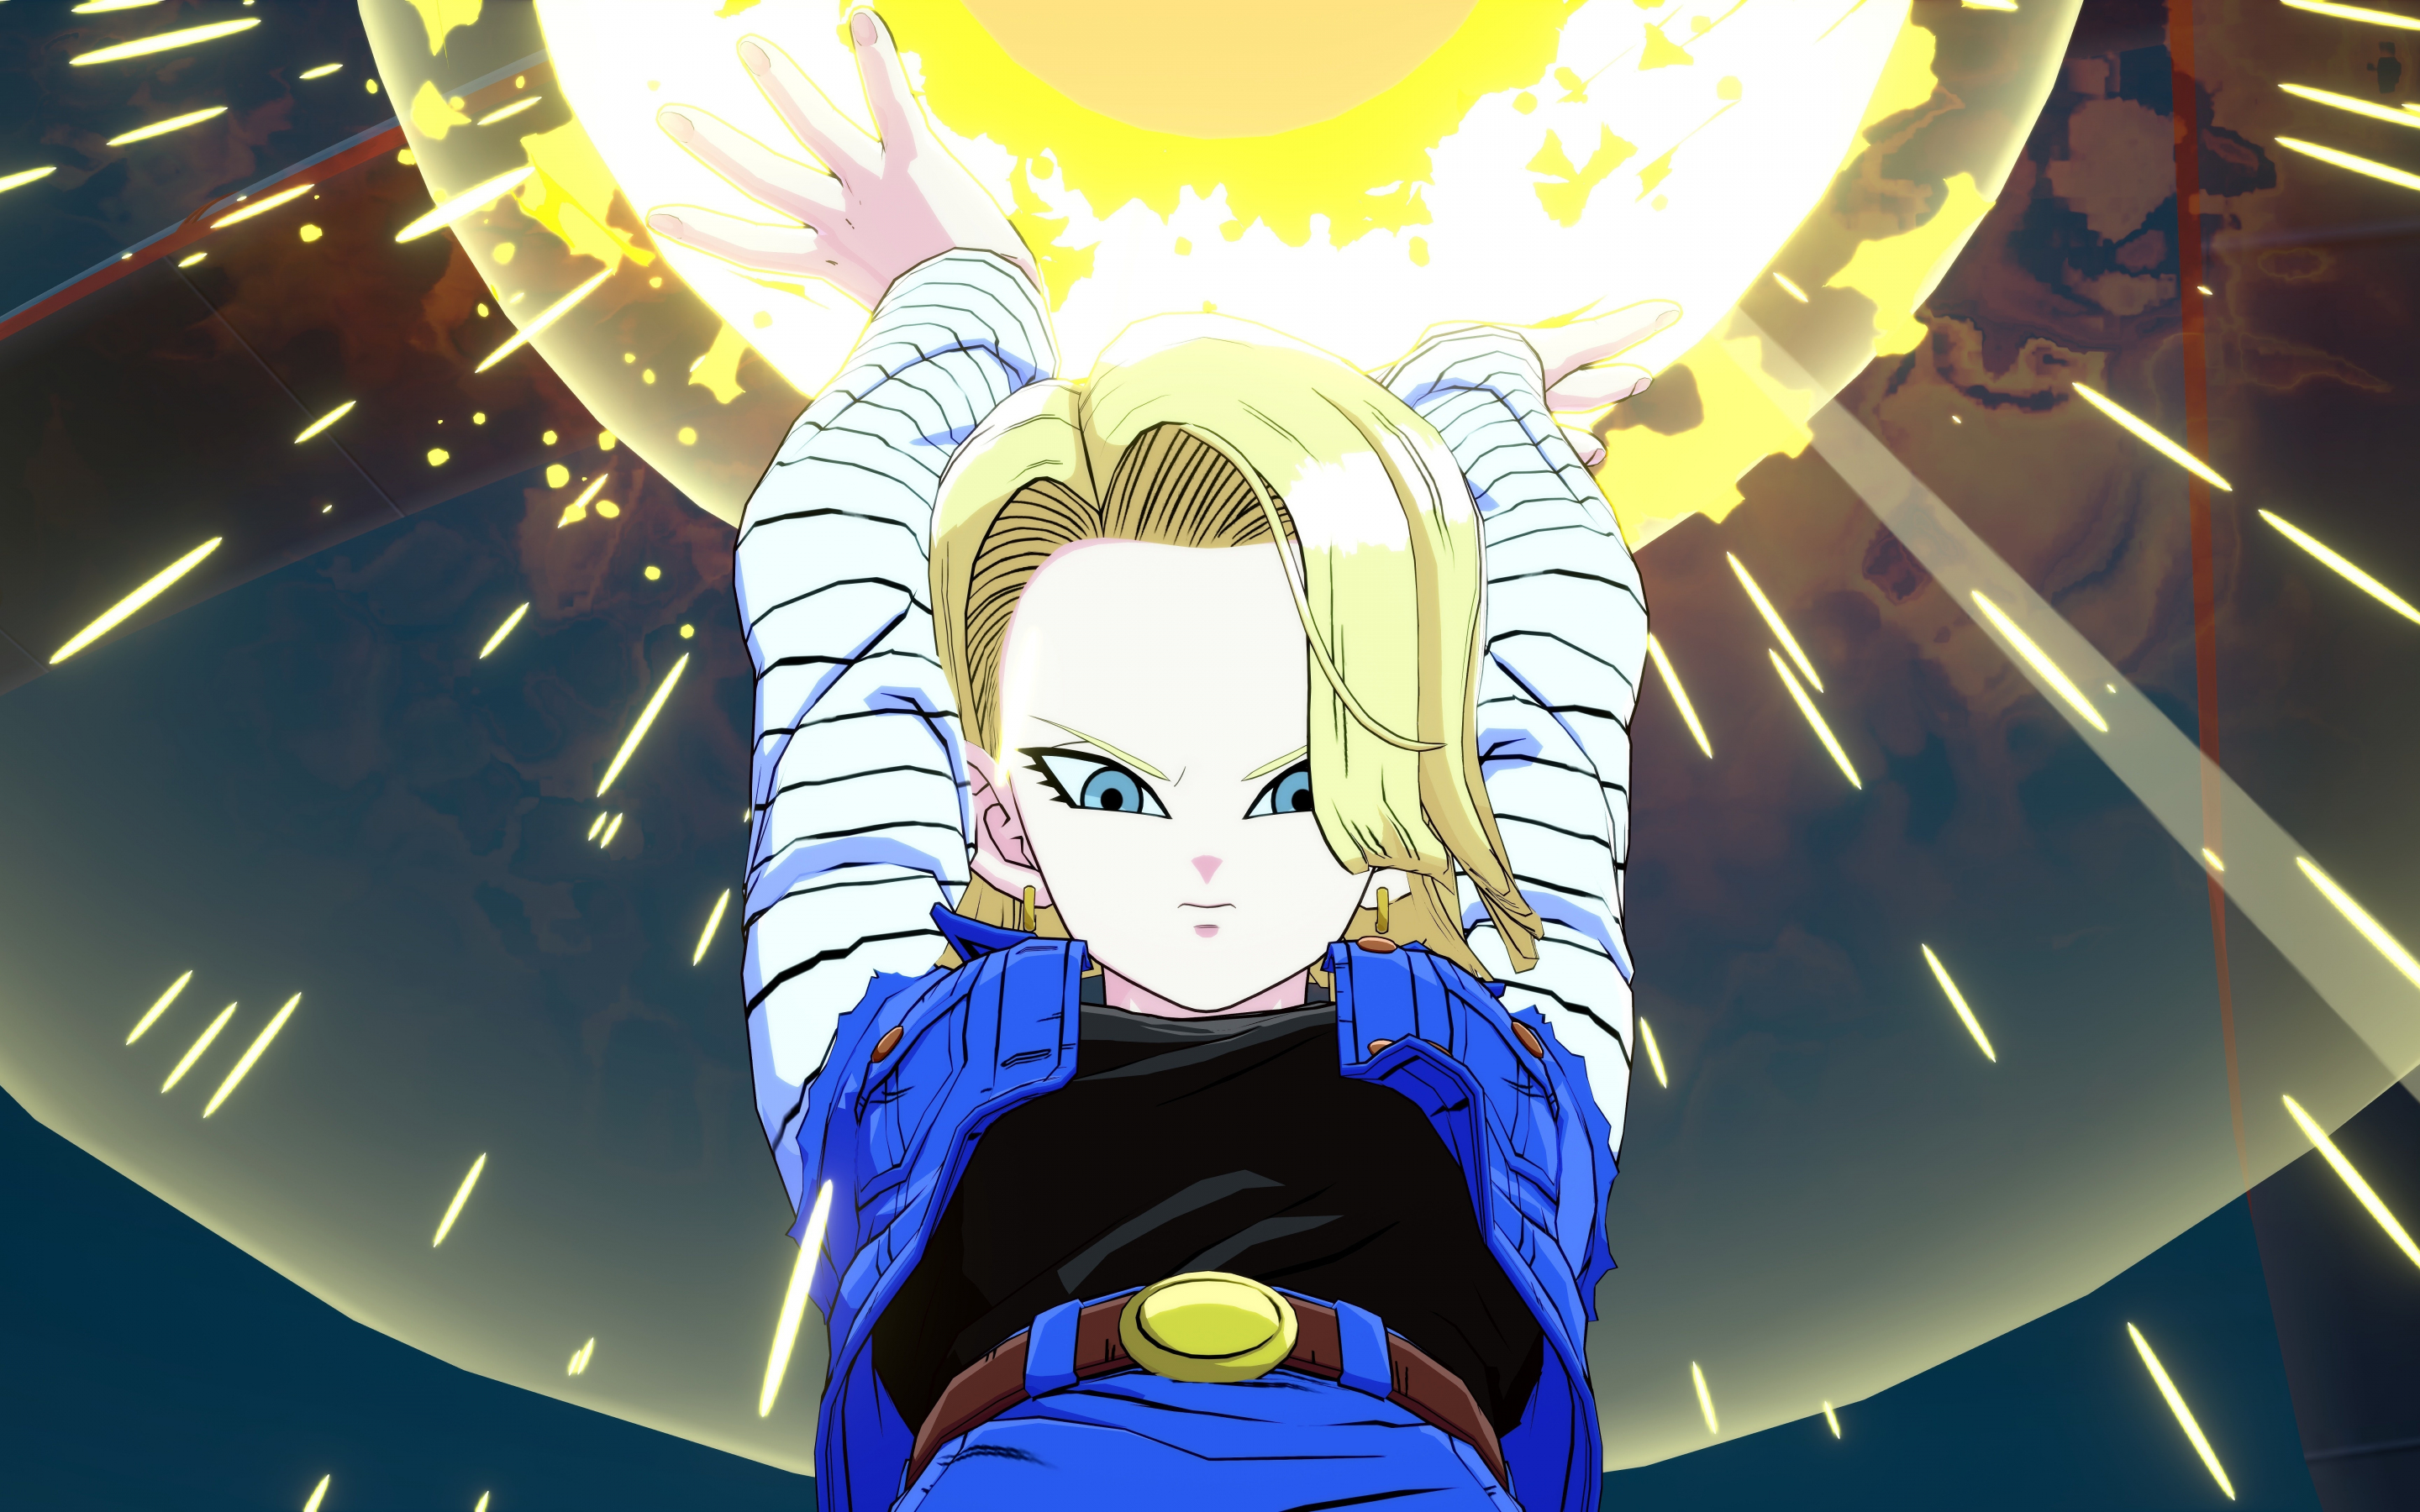 Android 18, Dragon ball fighterz, anime girl, 2880x1800 wallpaper